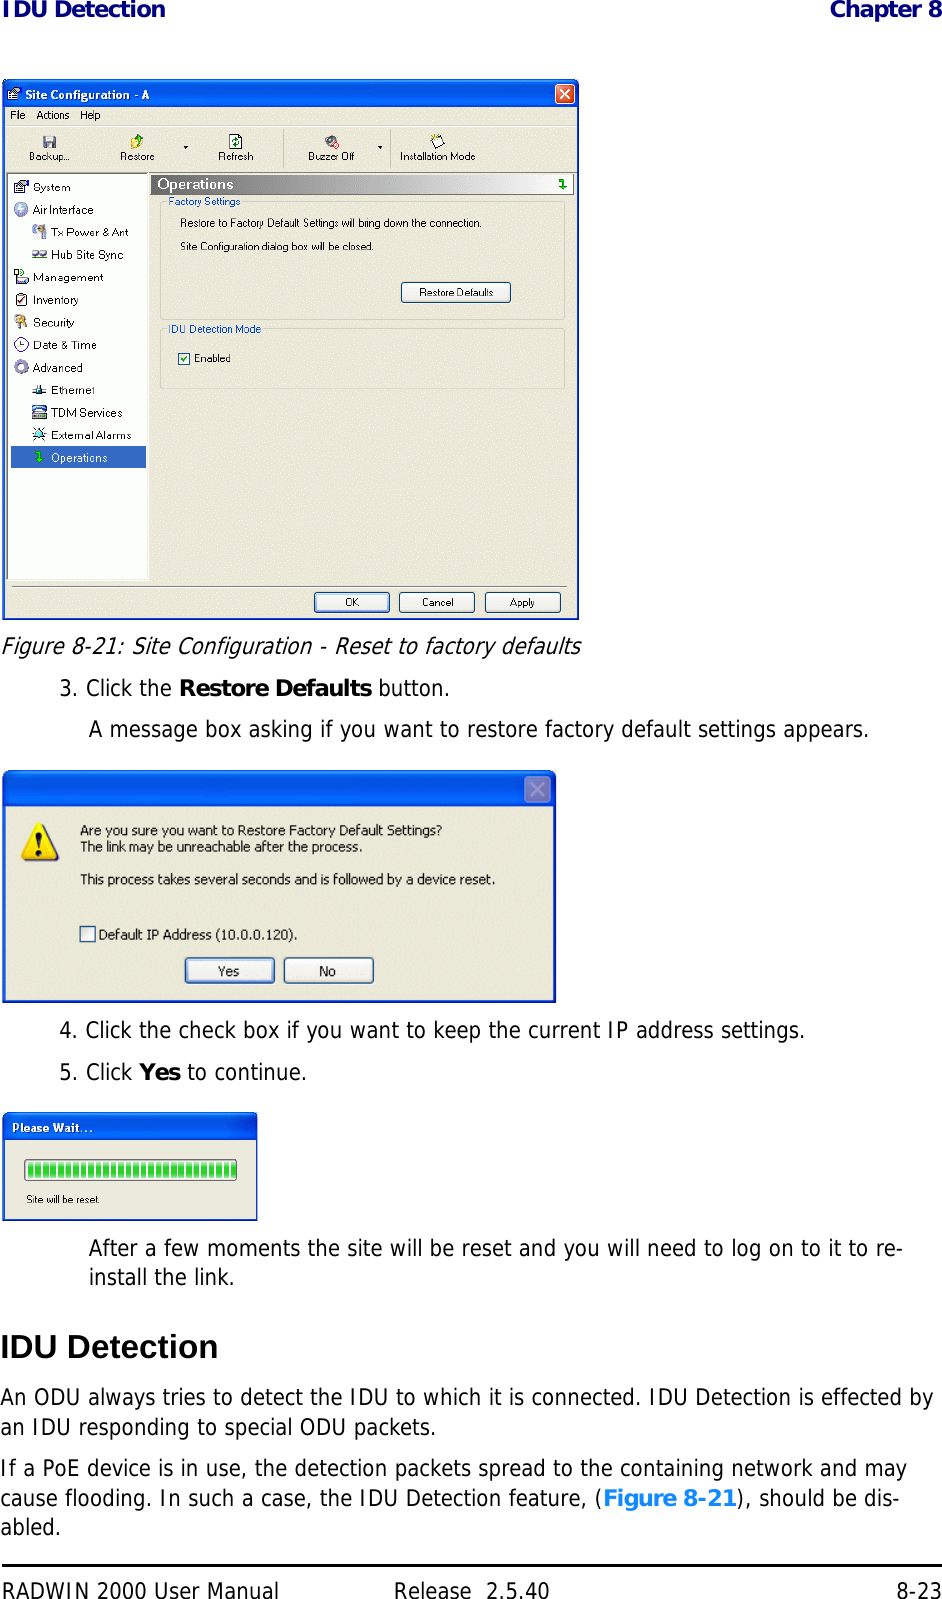 IDU Detection Chapter 8RADWIN 2000 User Manual Release  2.5.40 8-23Figure 8-21: Site Configuration - Reset to factory defaults3. Click the Restore Defaults button.A message box asking if you want to restore factory default settings appears.4. Click the check box if you want to keep the current IP address settings.5. Click Yes to continue.After a few moments the site will be reset and you will need to log on to it to re-install the link.IDU DetectionAn ODU always tries to detect the IDU to which it is connected. IDU Detection is effected by an IDU responding to special ODU packets.If a PoE device is in use, the detection packets spread to the containing network and may cause flooding. In such a case, the IDU Detection feature, (Figure 8-21), should be dis-abled.